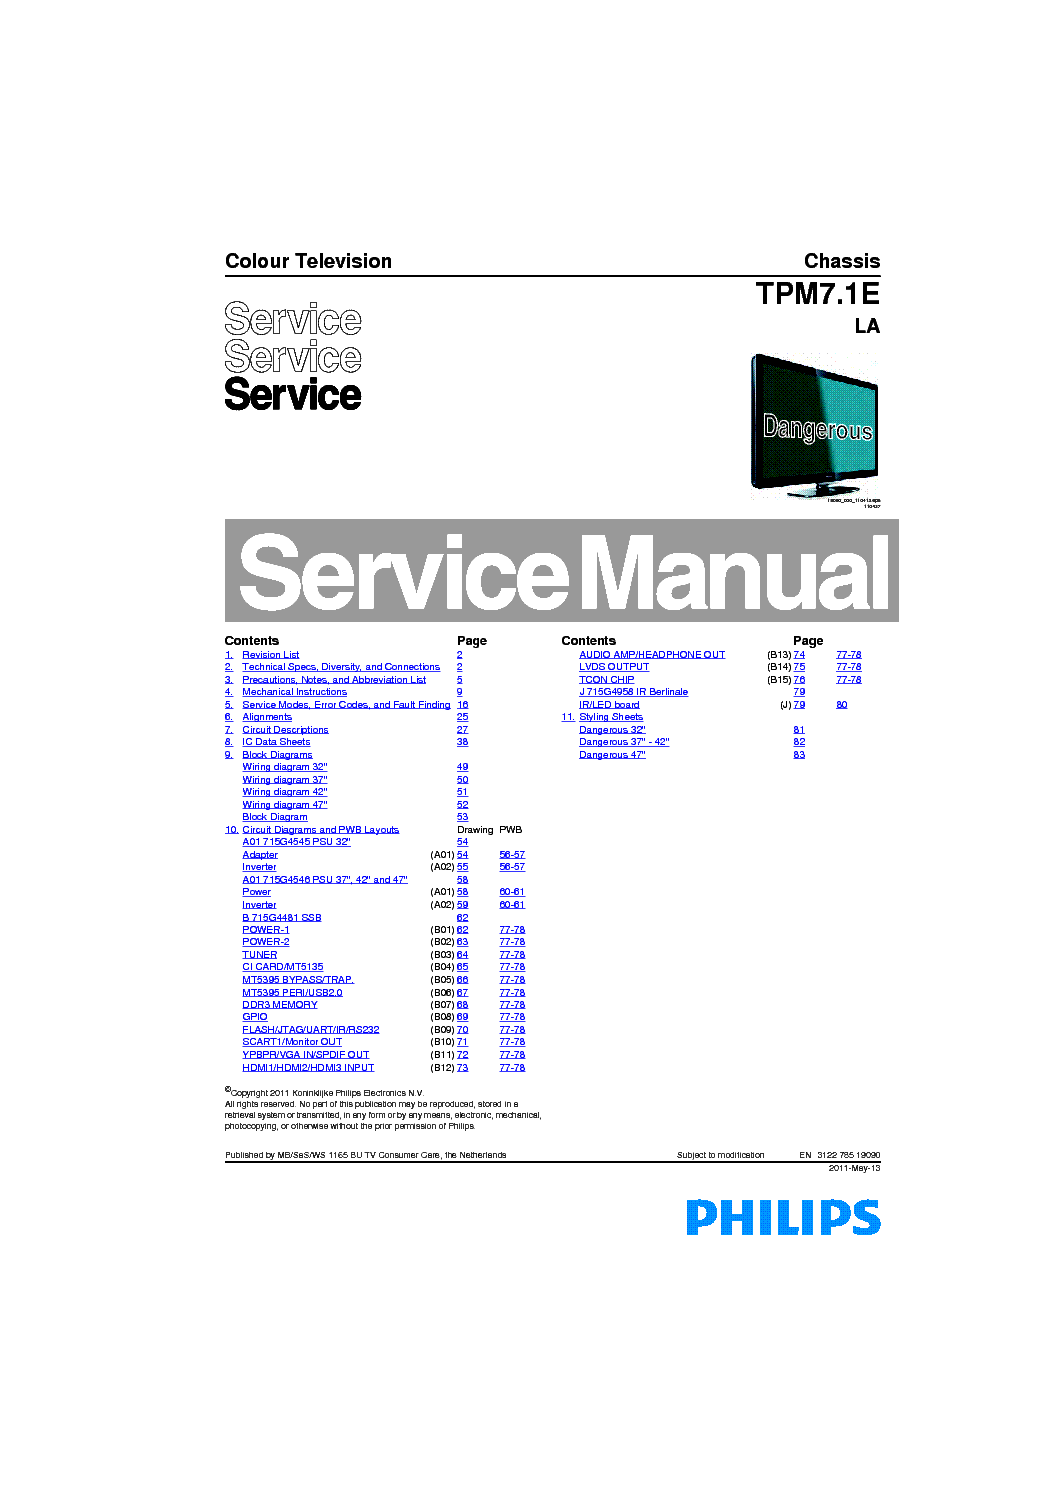 PHILIPS TPM7.1ELA 312278519090 110513 VER.1.0 service manual (1st page)